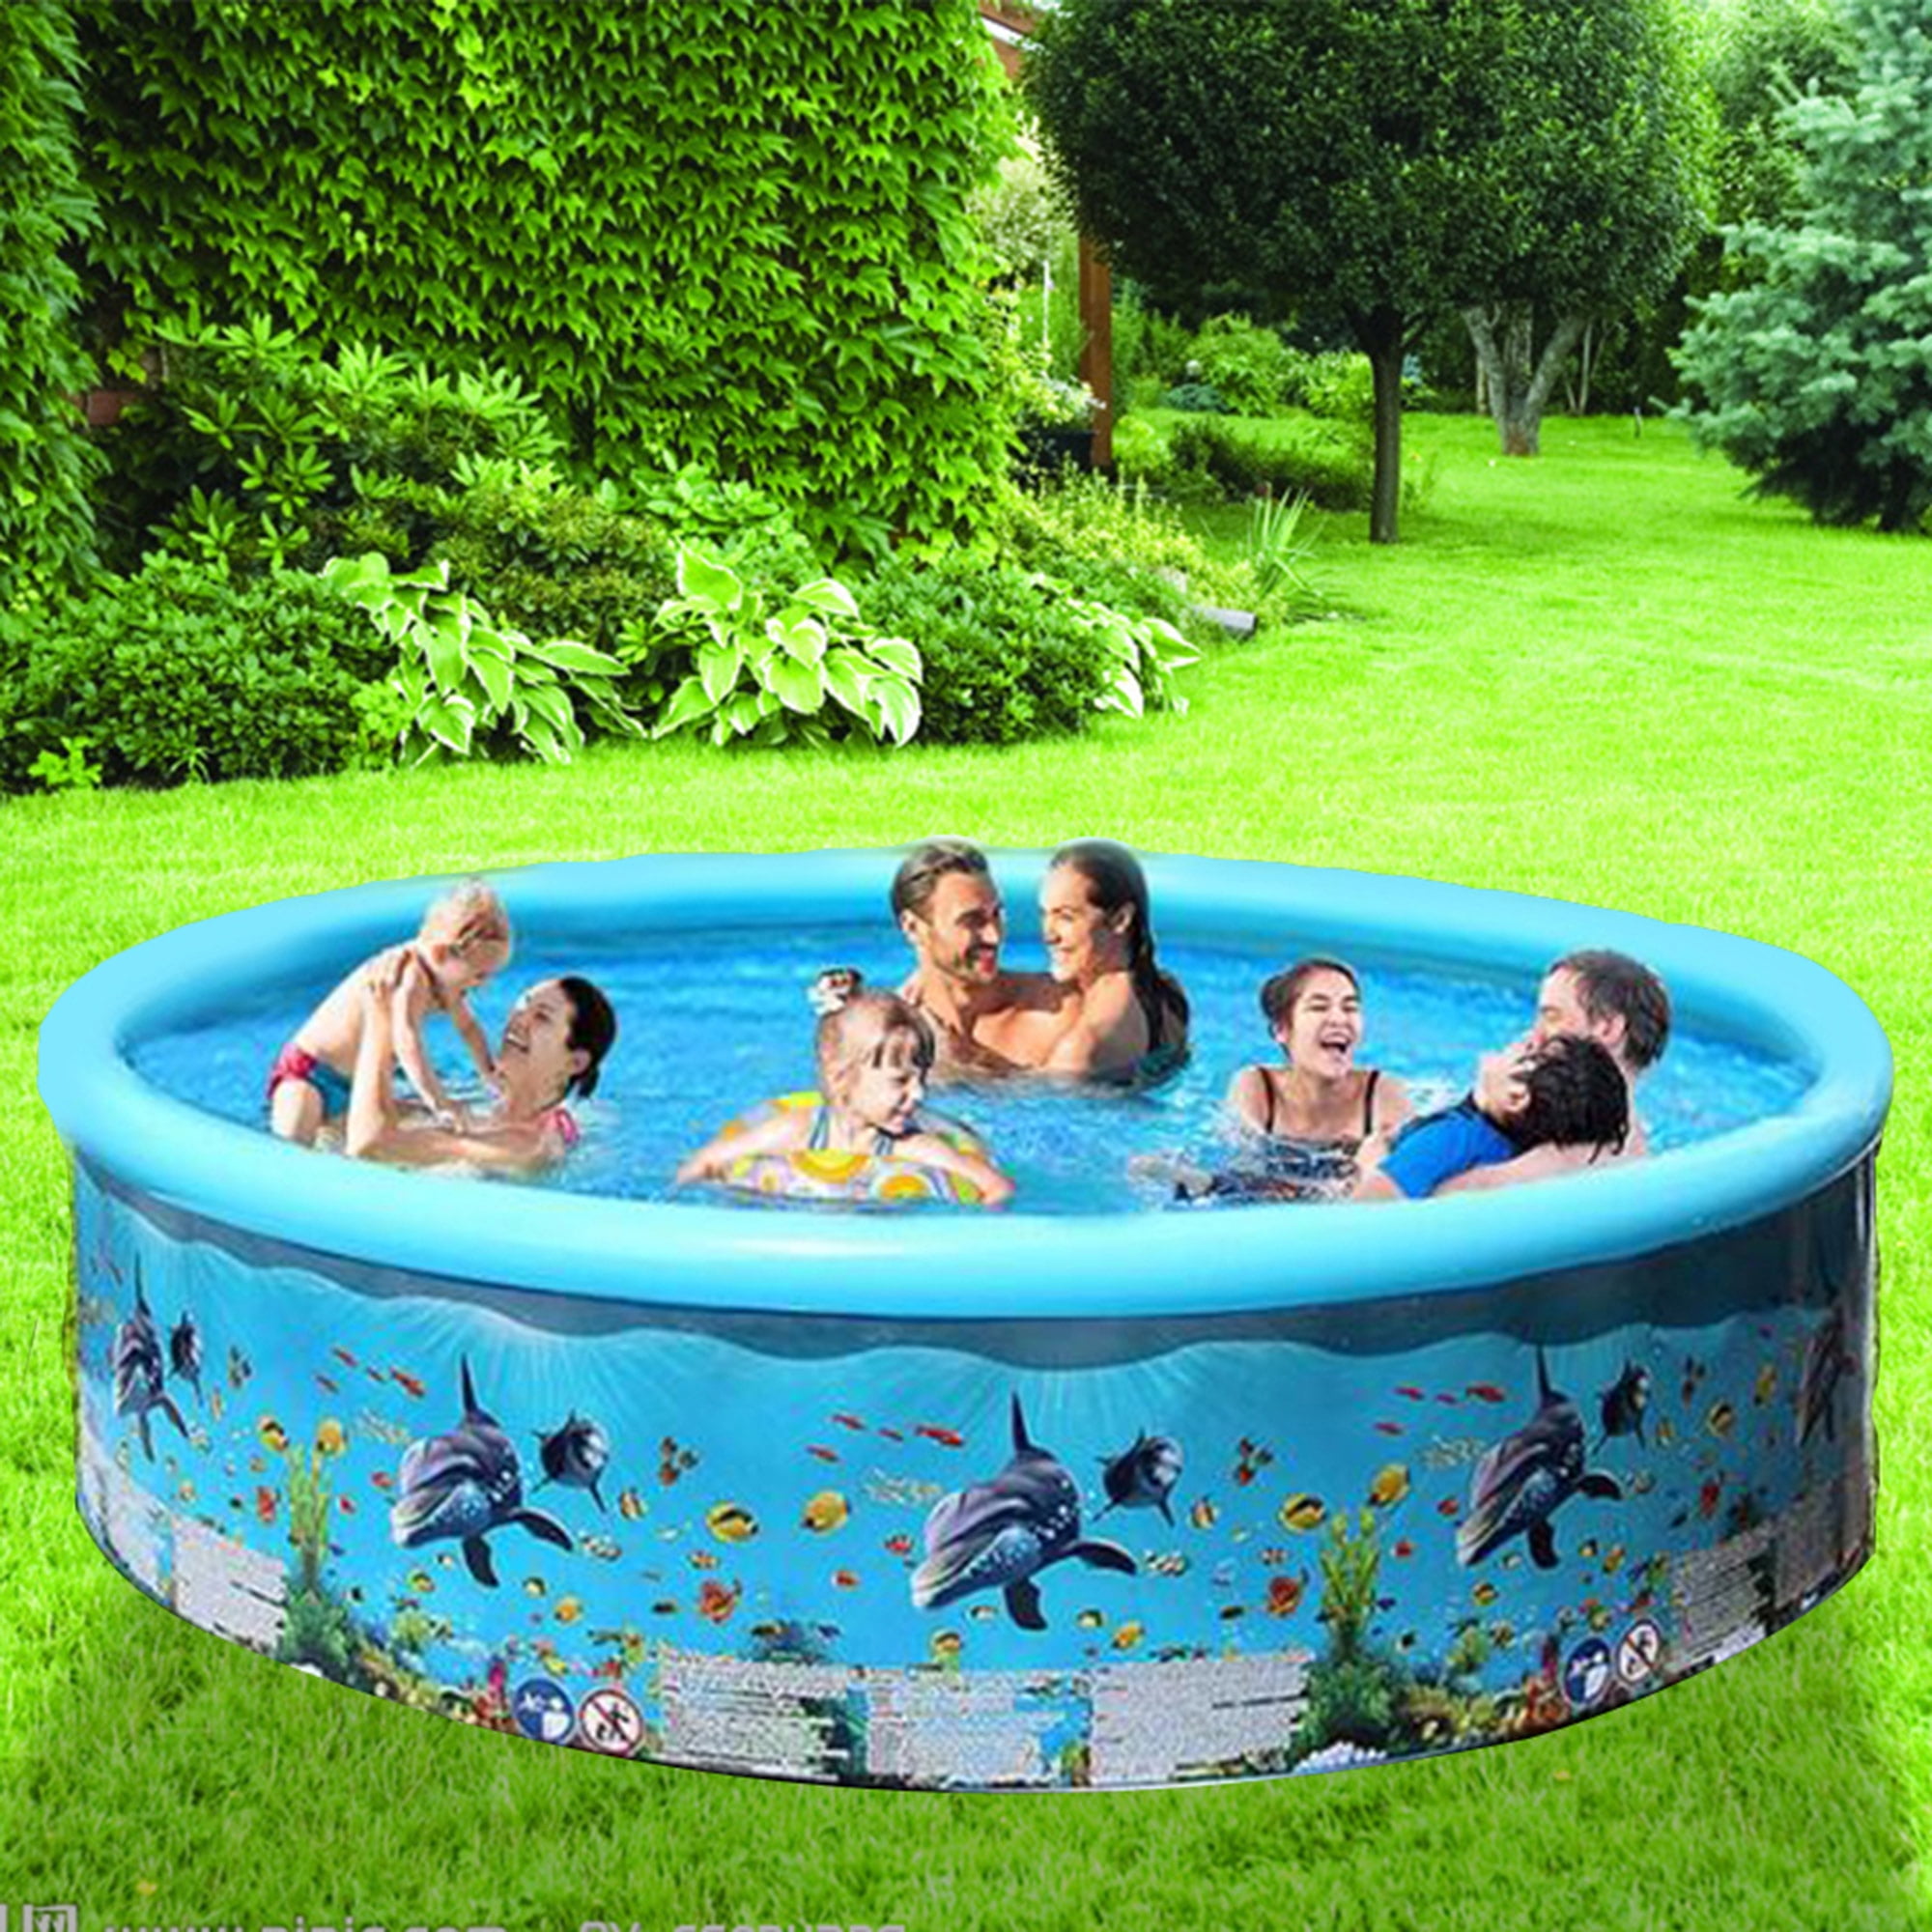 Inflatable Paddling Pool Swimming Pool Swimming Pool with Fun and Safe Printing PVC Play Bathing Pool for Family Children 150x105x55cm 